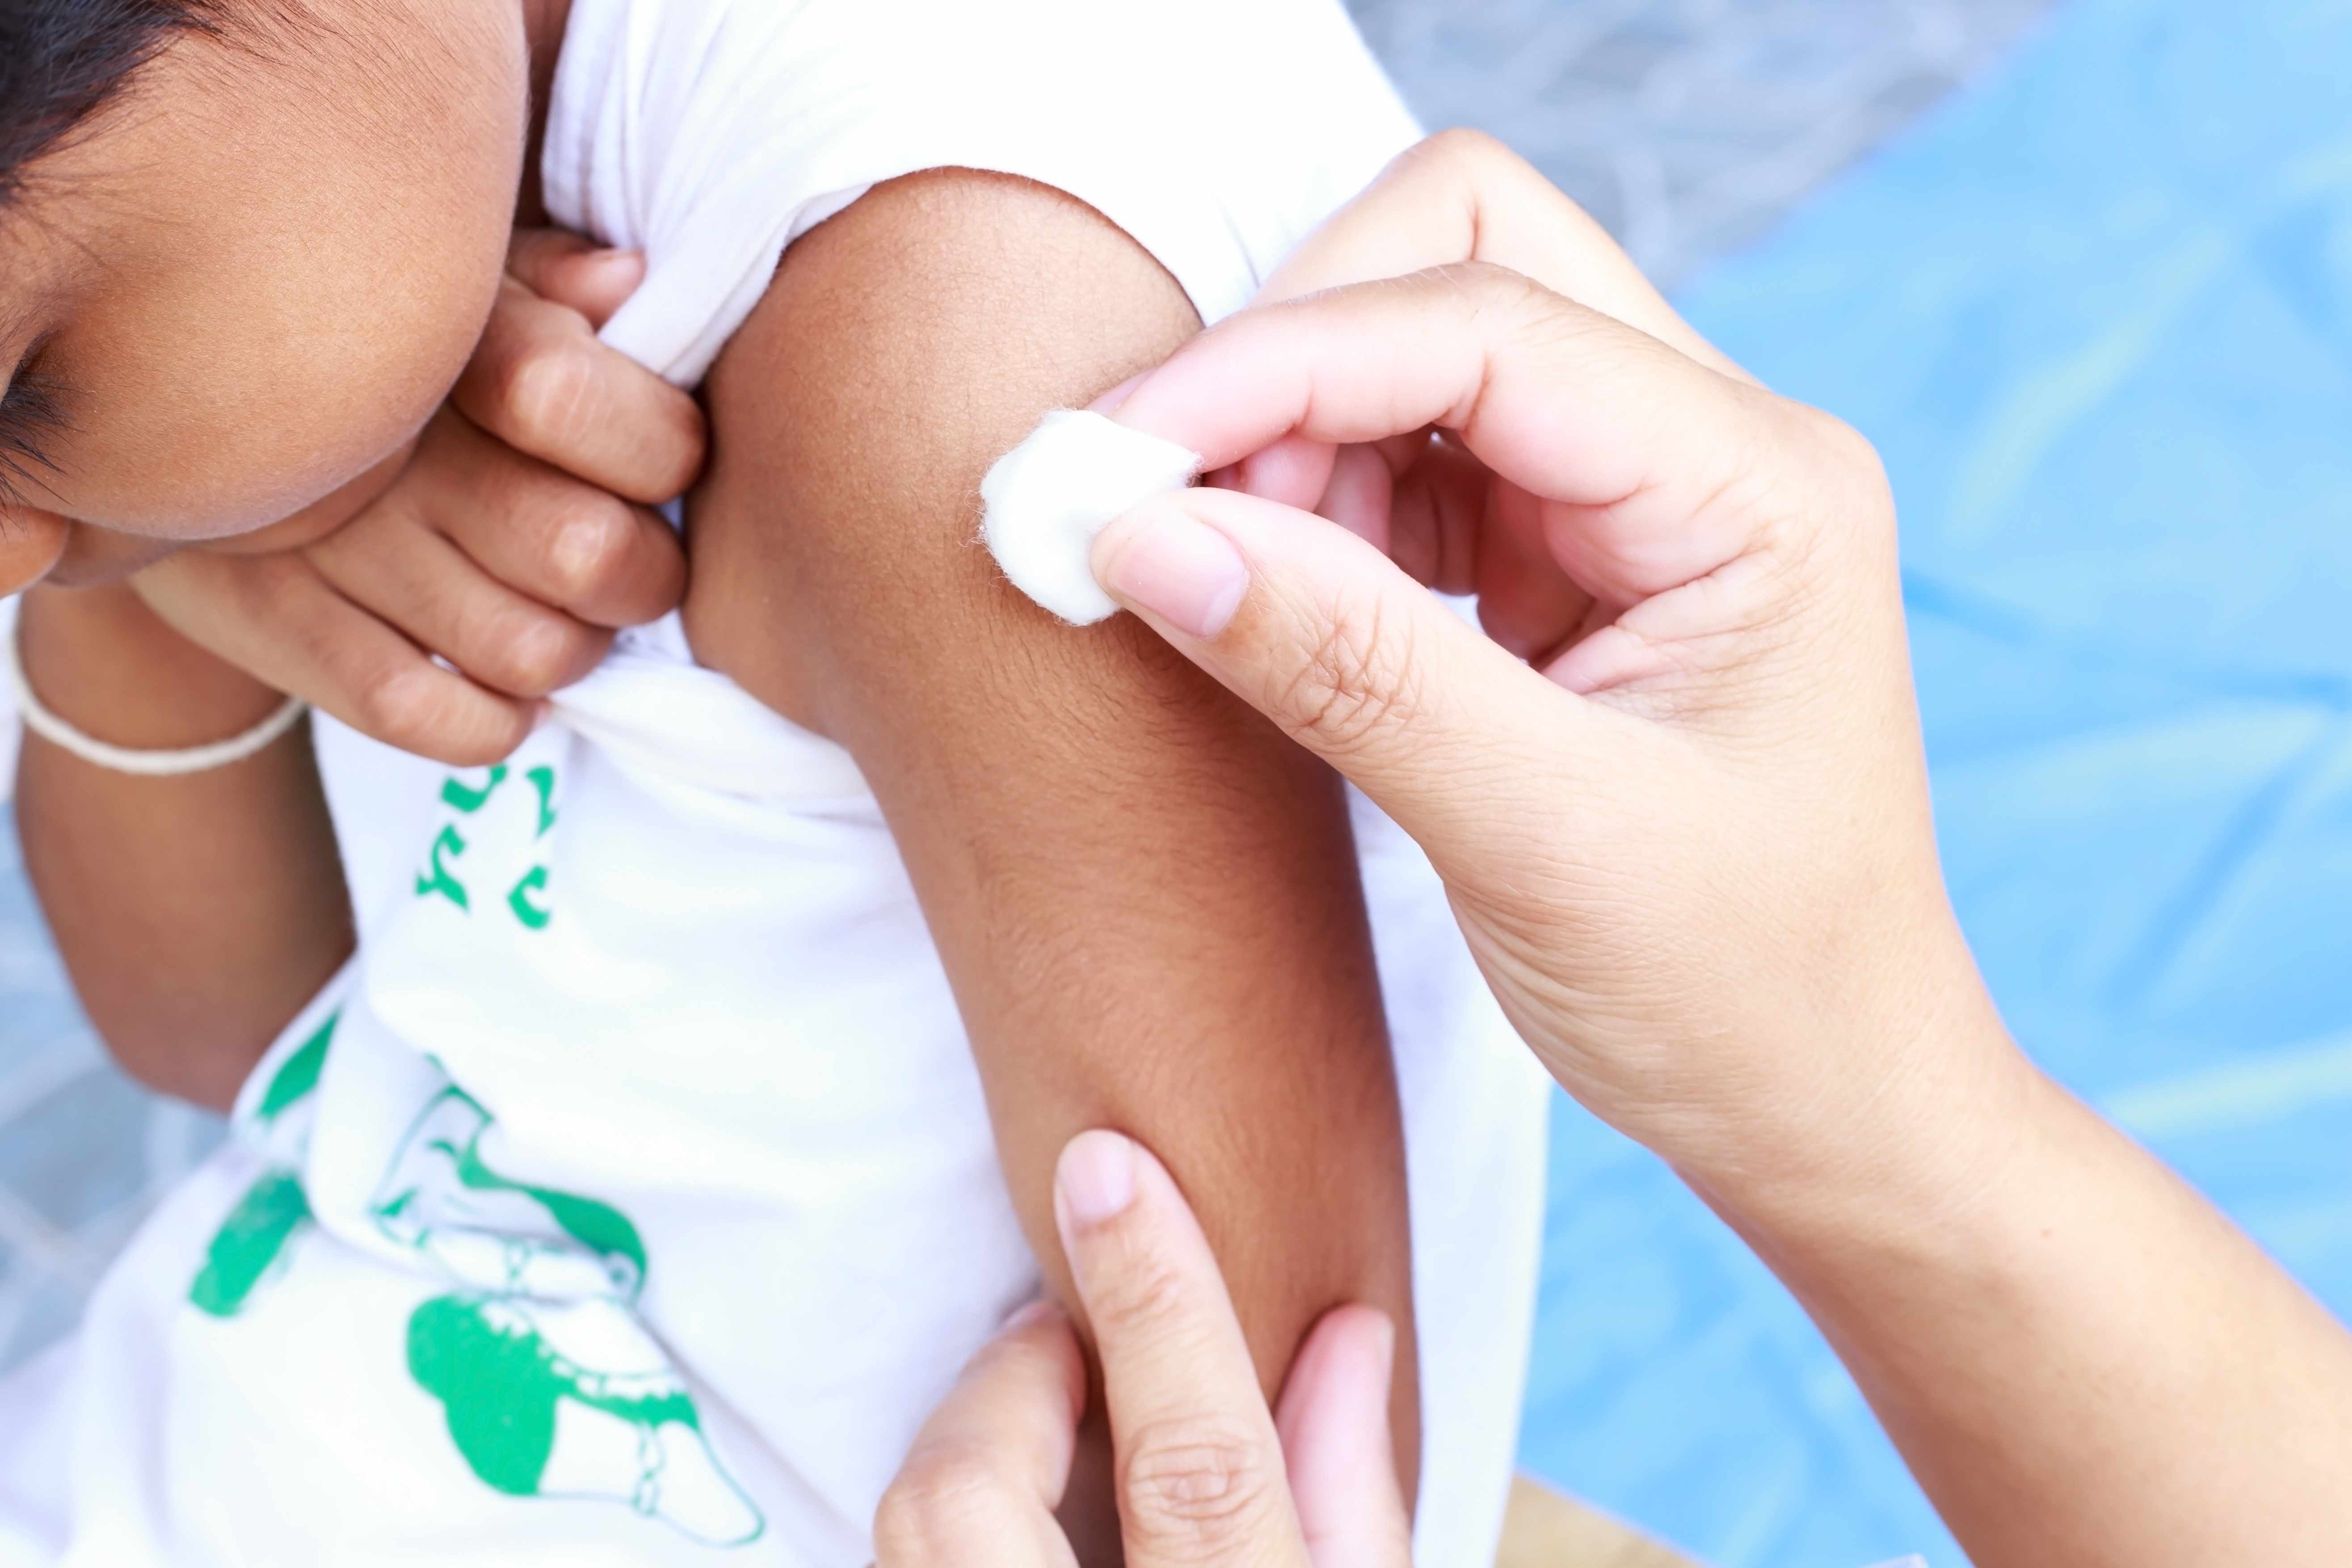 a child having just received a vaccination shot